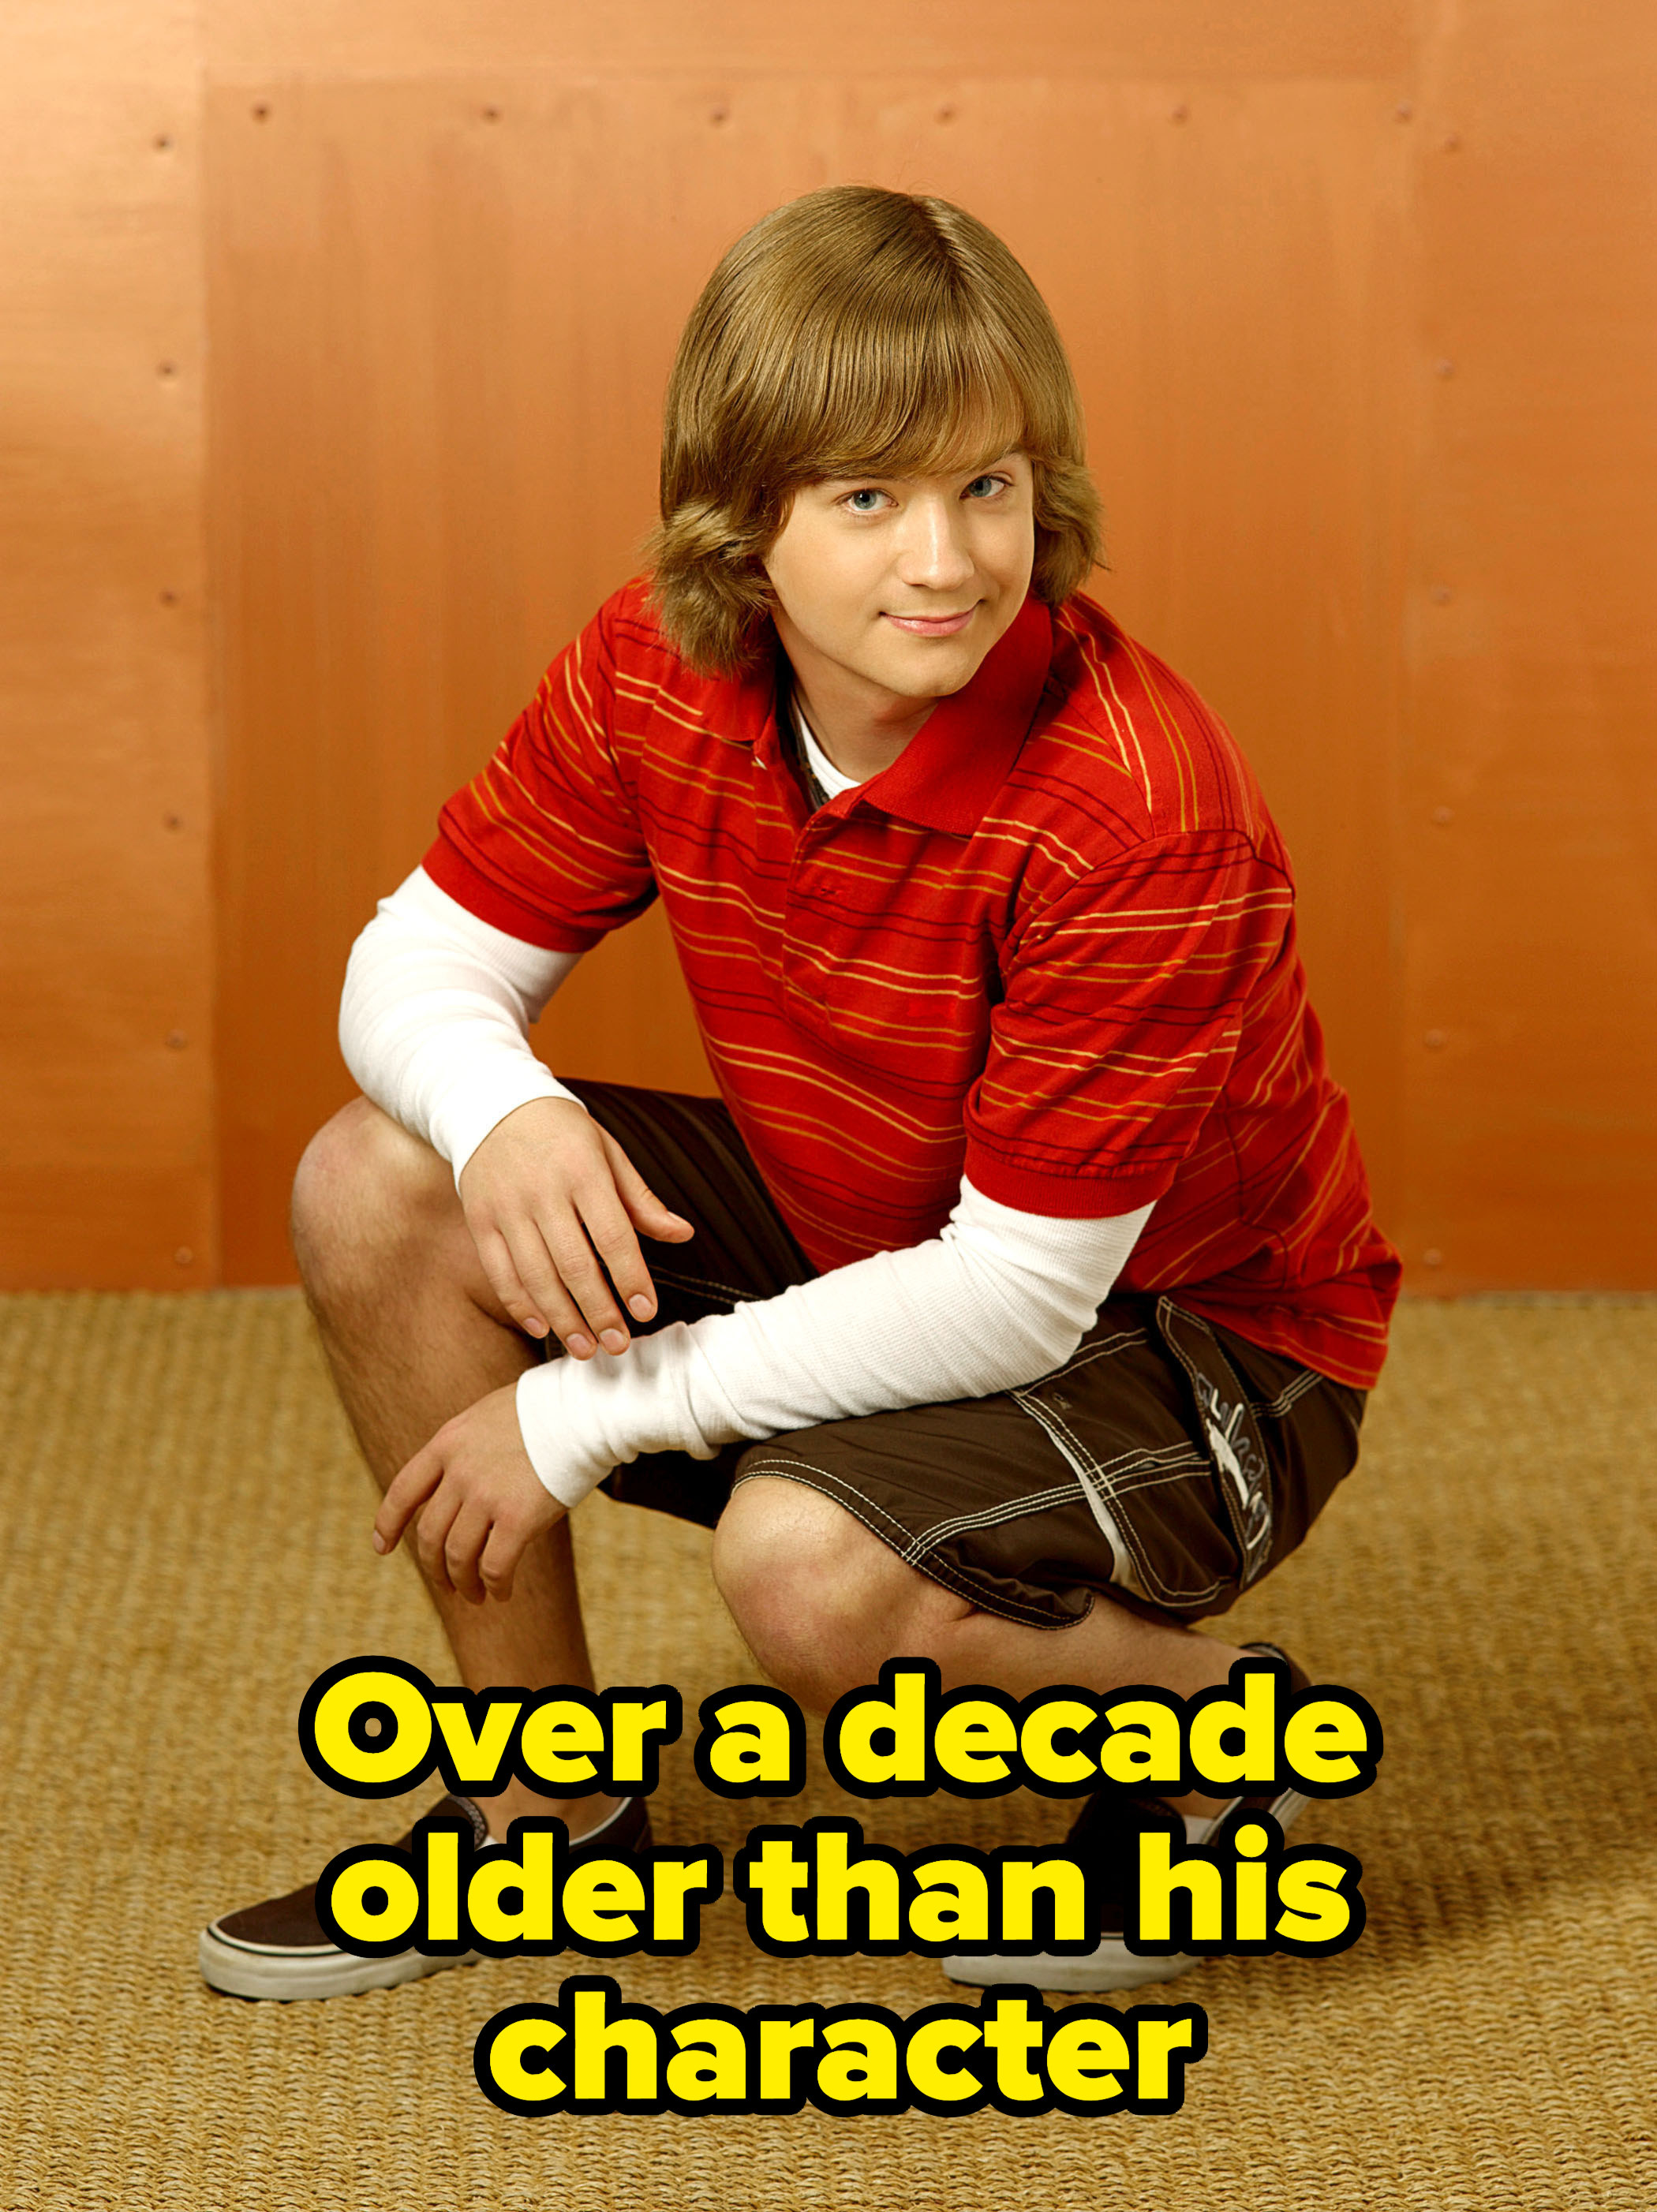 Jackson in a promo shot for the show&#x27;s second season with the label, &quot;Over a decade older than his character&quot;